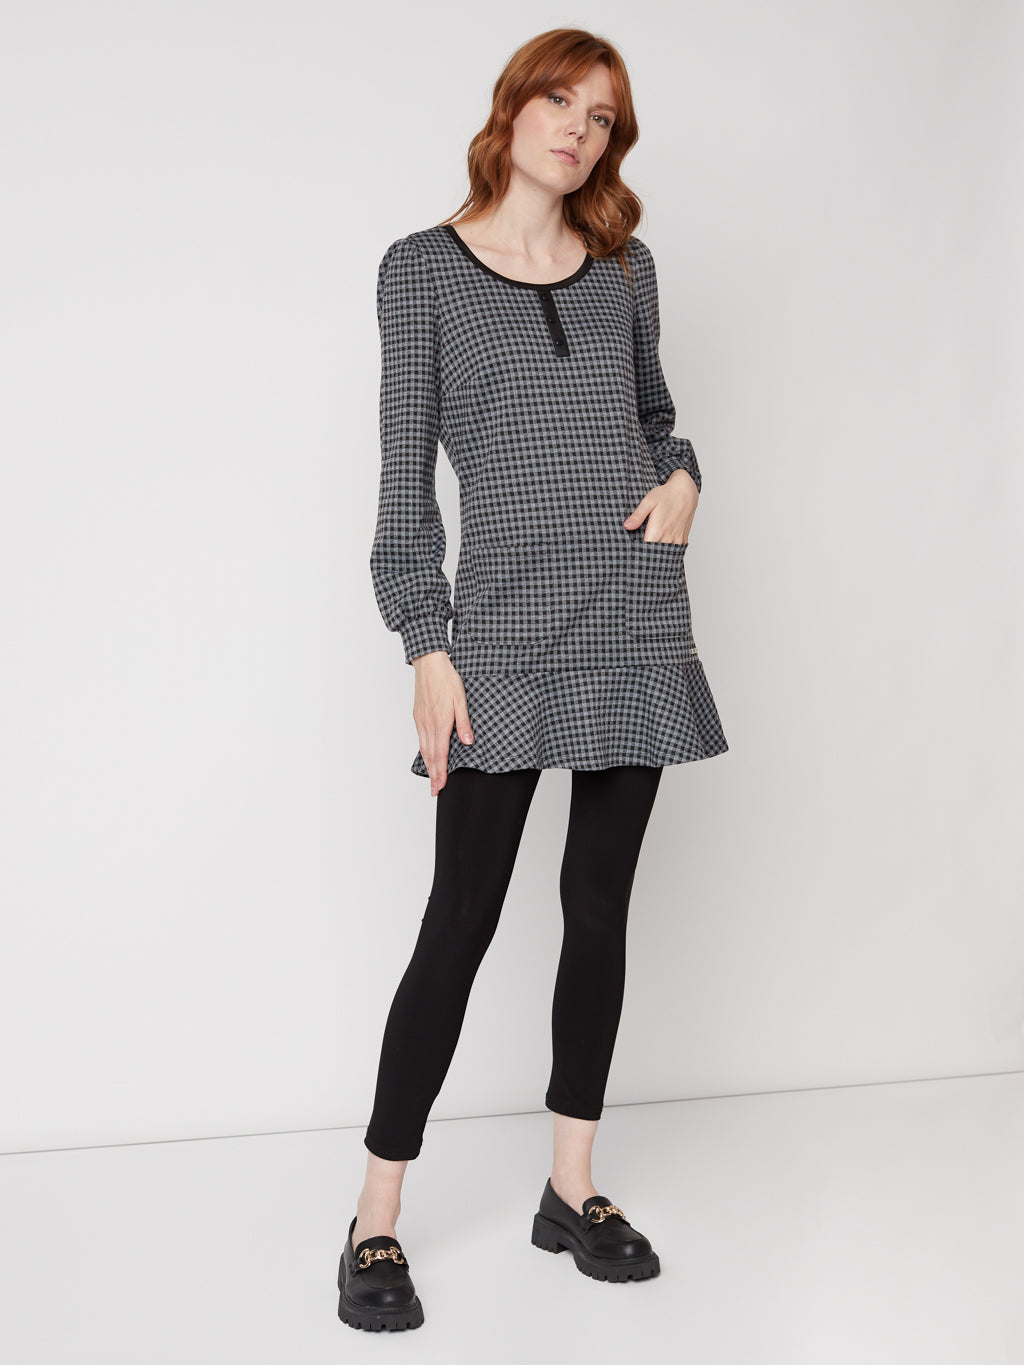 Long-sleevesemi-fitted knit tunic